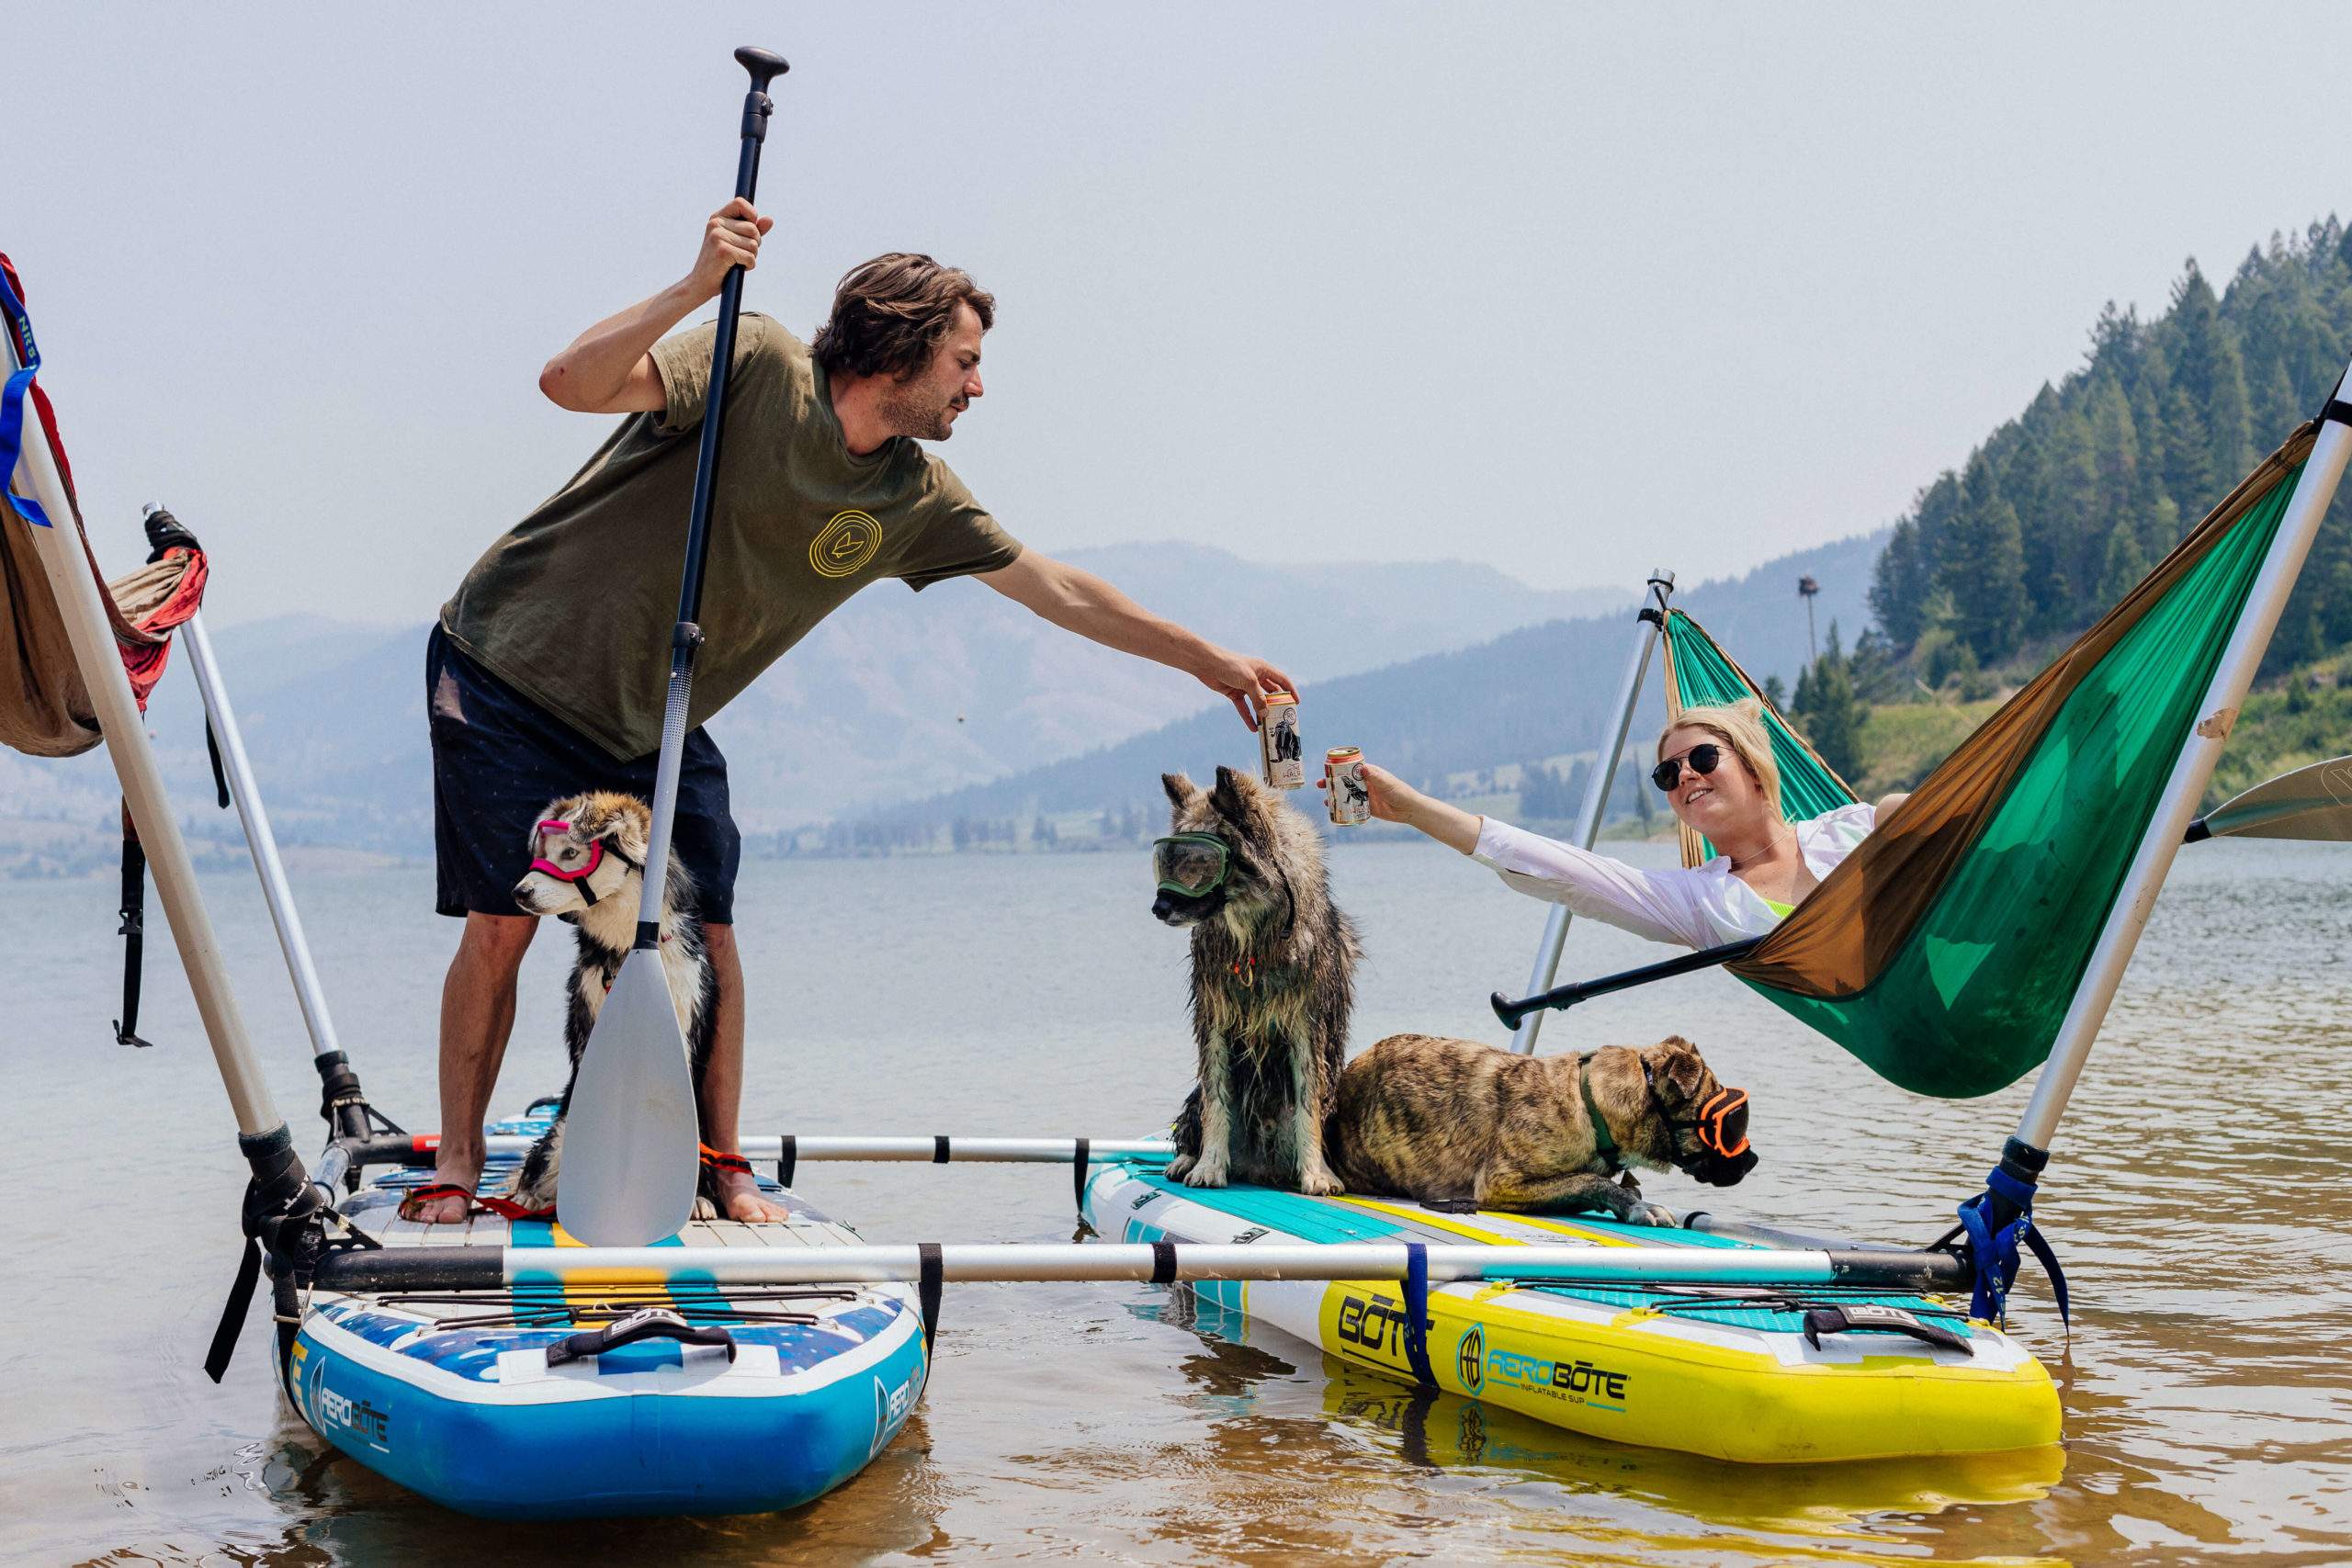 5 expert tips for traveling with dogs